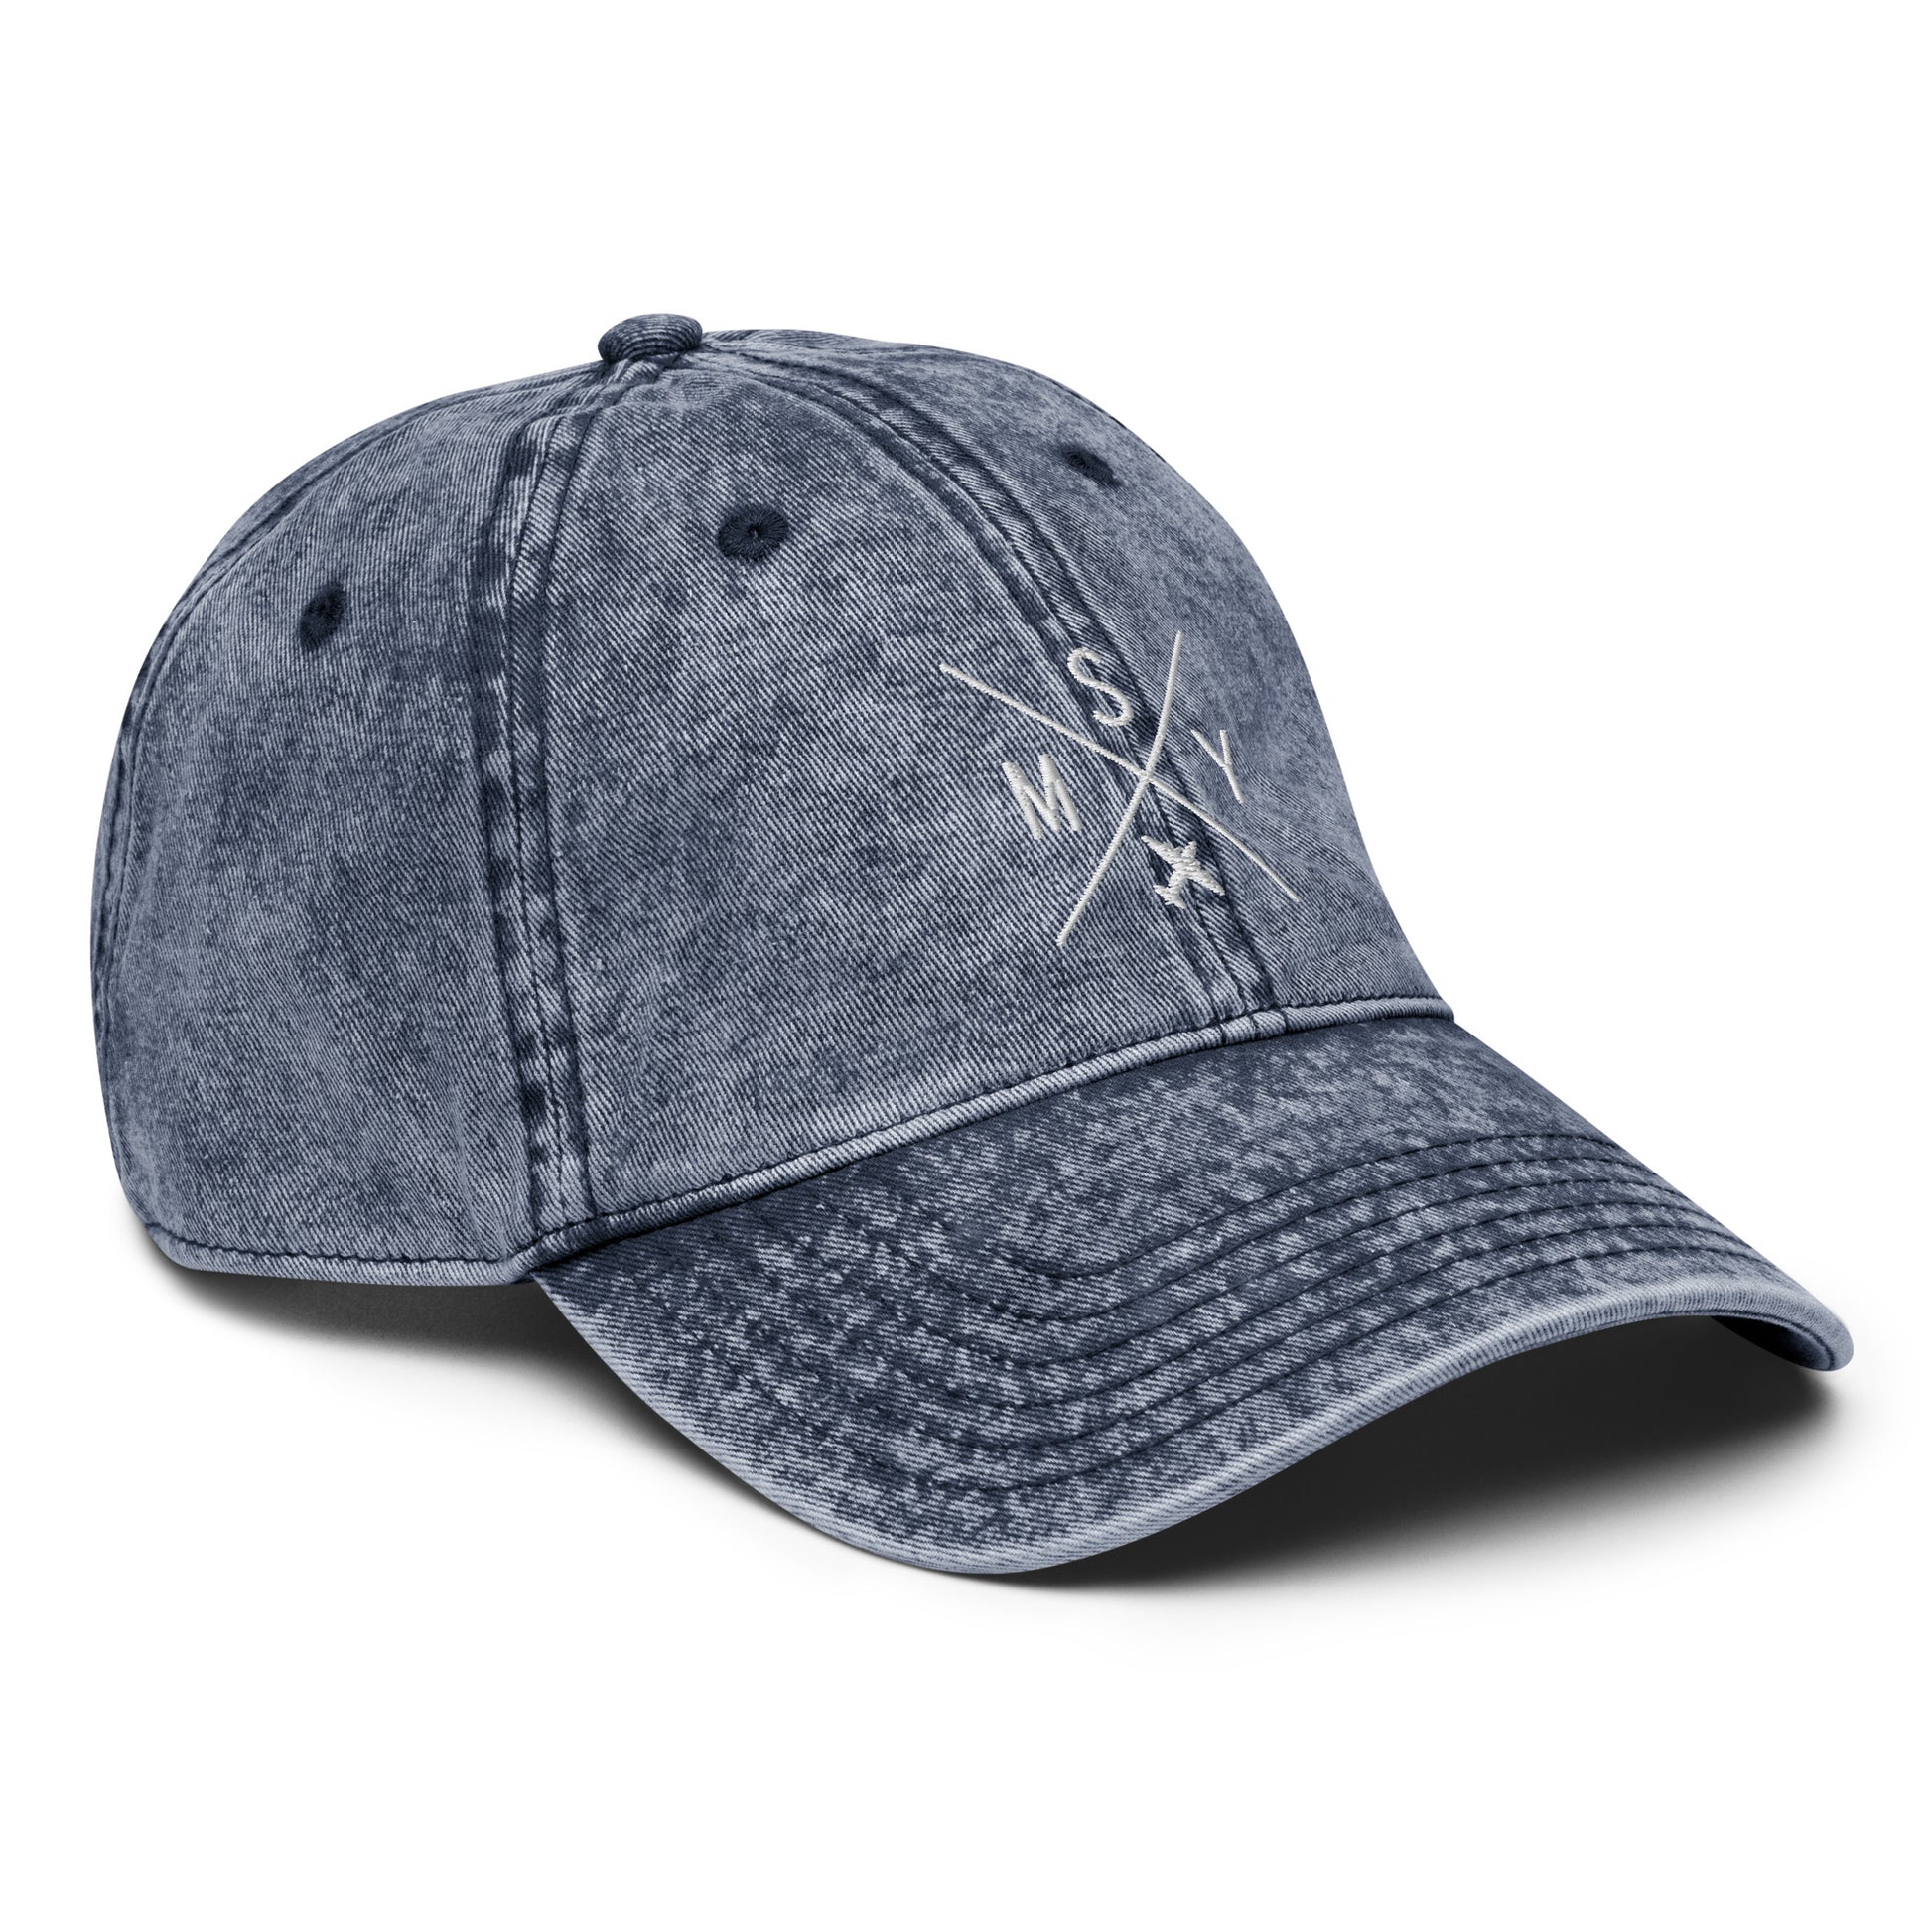 Crossed-X Cotton Twill Cap - White • MSY New Orleans • YHM Designs - Image 21